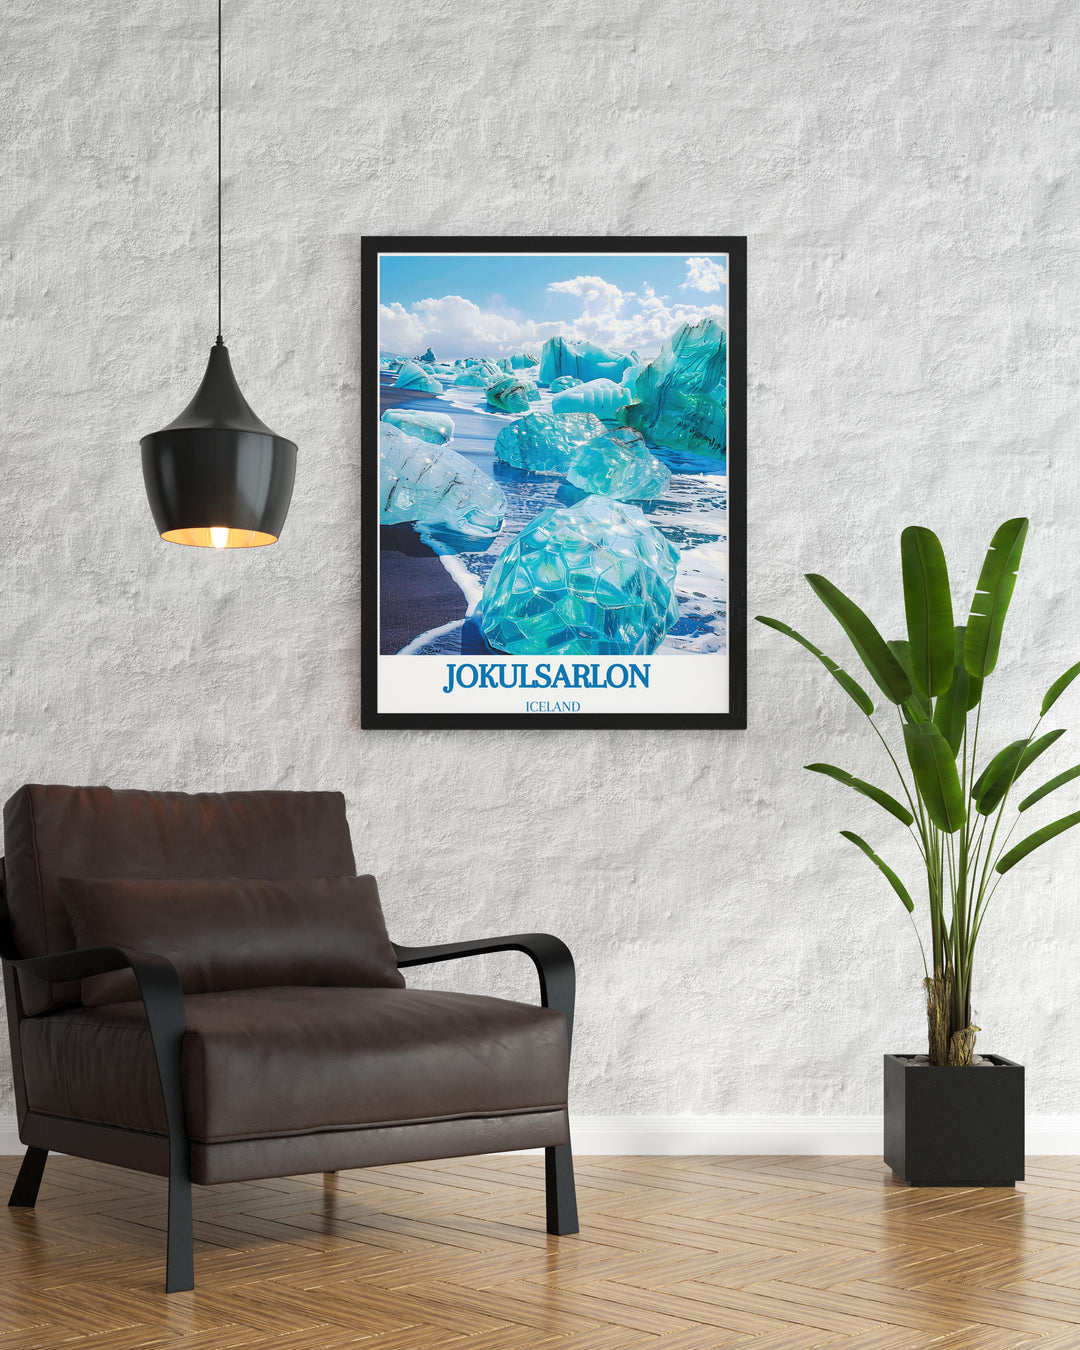 Home decor print of the Blue Lagoon Iceland creating a tranquil environment in spa like or bathroom settings